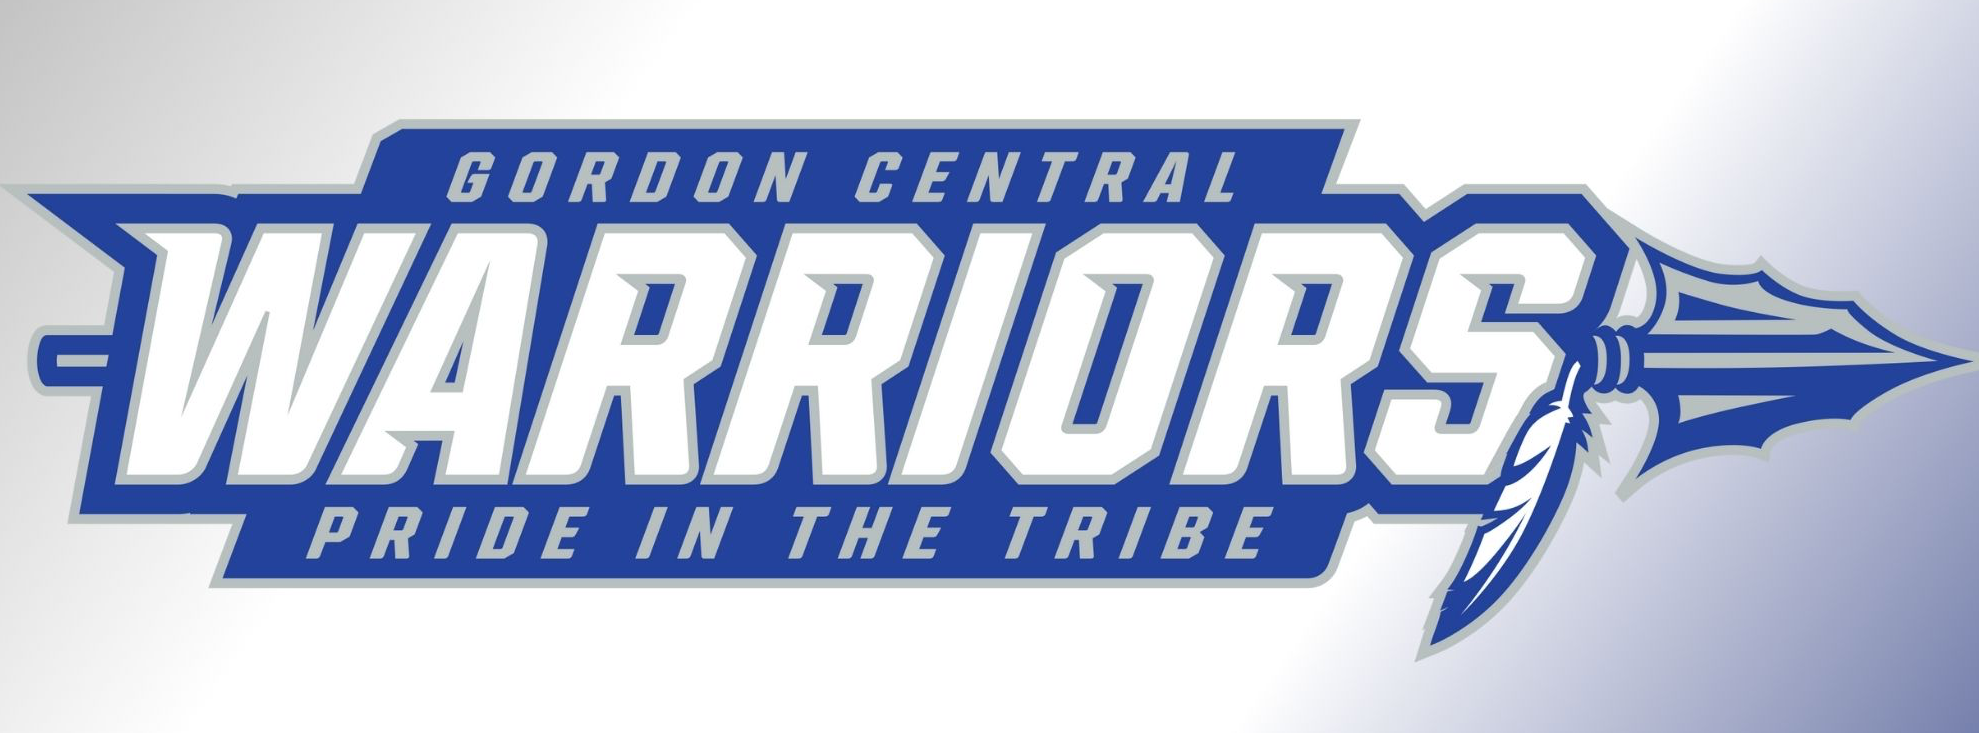 GORDON CENTRAL HIGH SCHOOL WARRIORS - PRIDE IN THE TRIBE